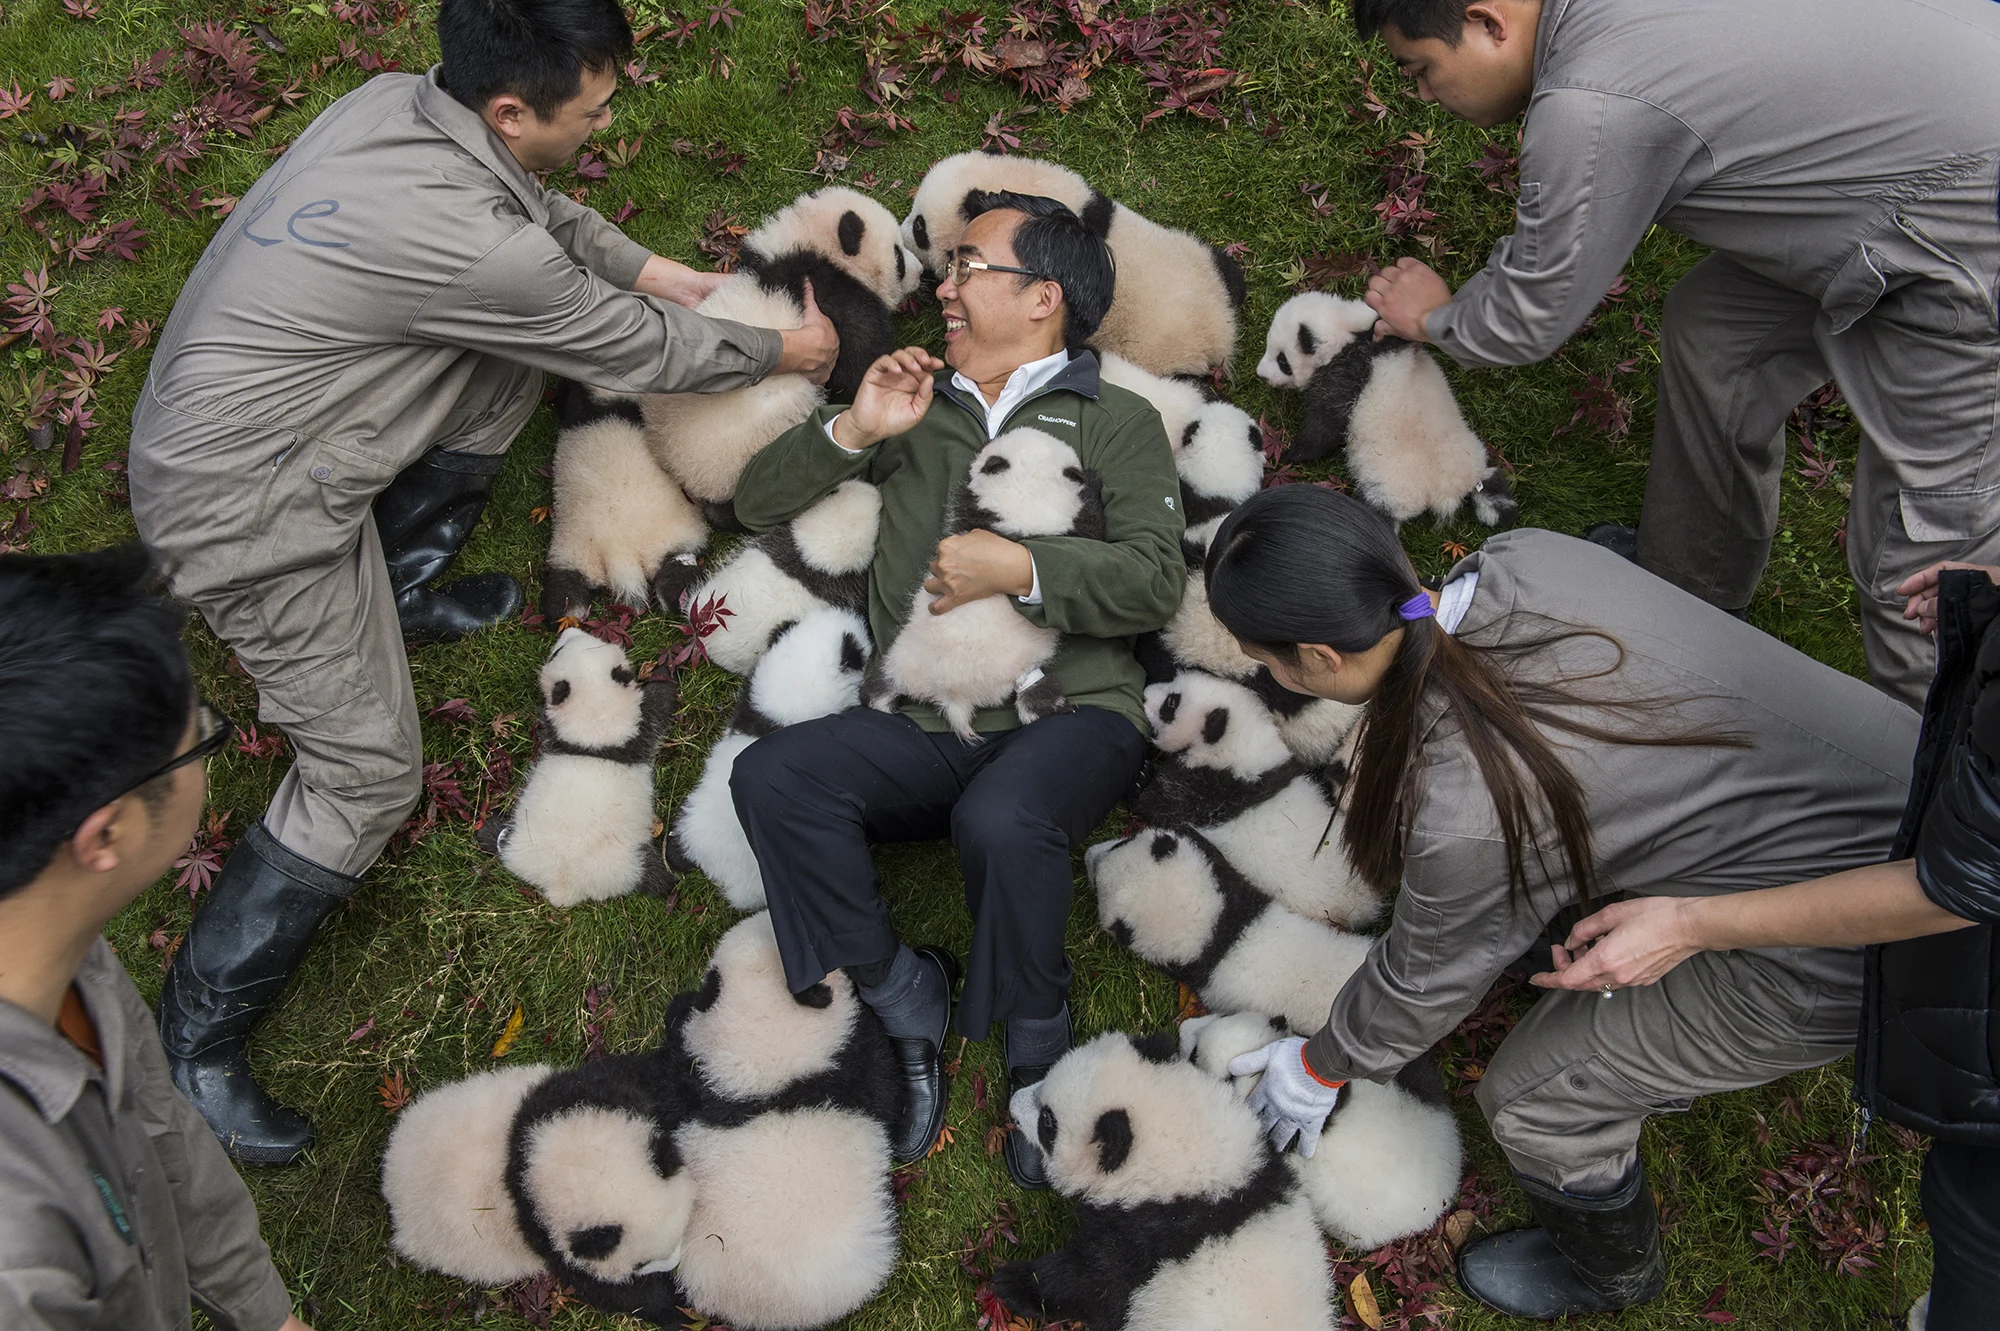 Gao Xiao Wen poses for portraits at the Wolong China Conservation and Research Center for the Giant Panda in Sichuan province, China.